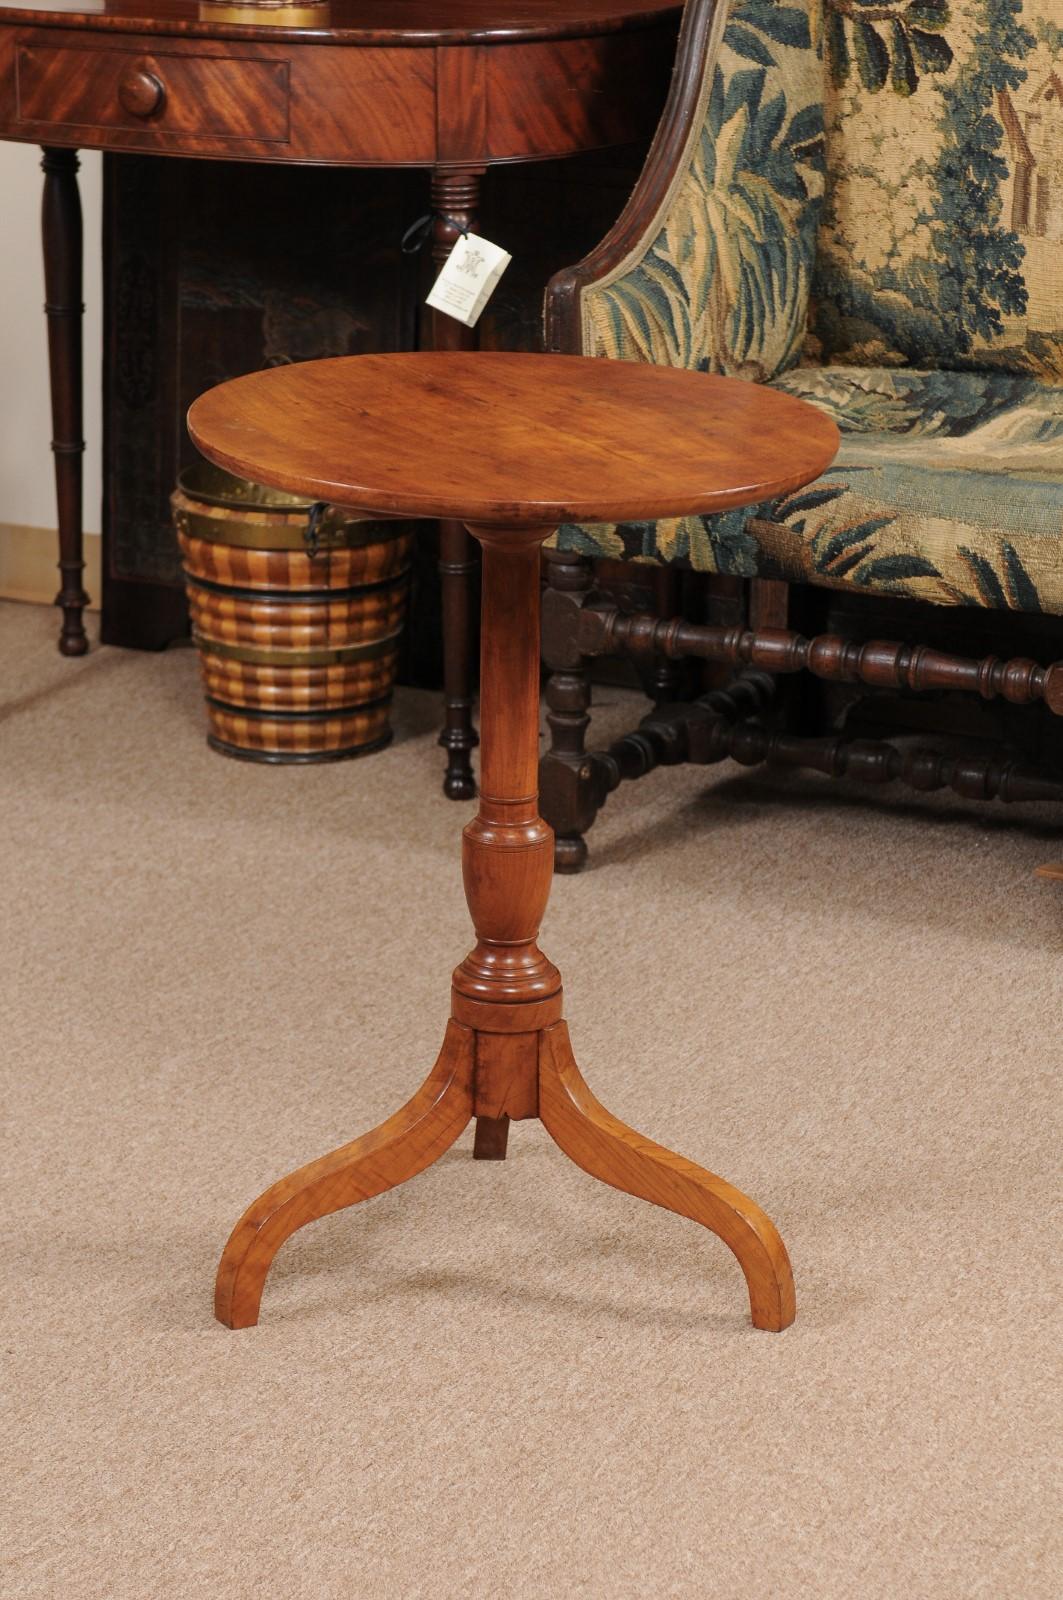 The candle stand with circular top with tilting mechanism and tripod base.